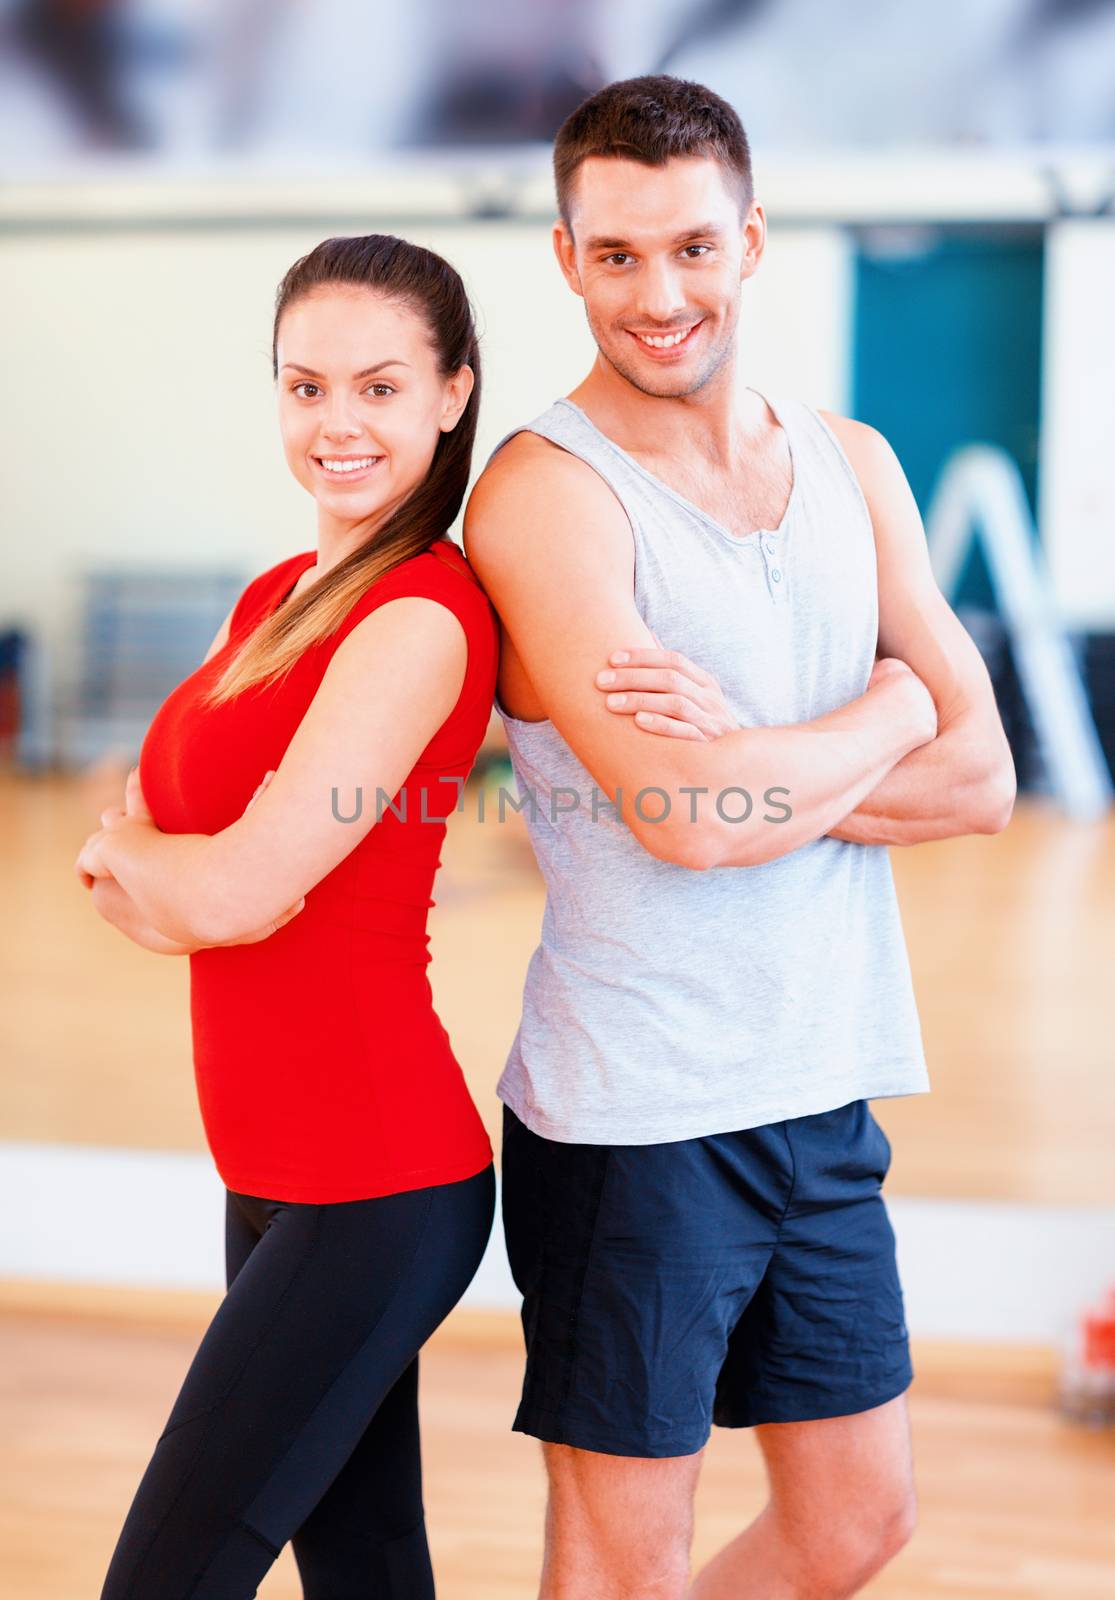 two smiling people in the gym by dolgachov